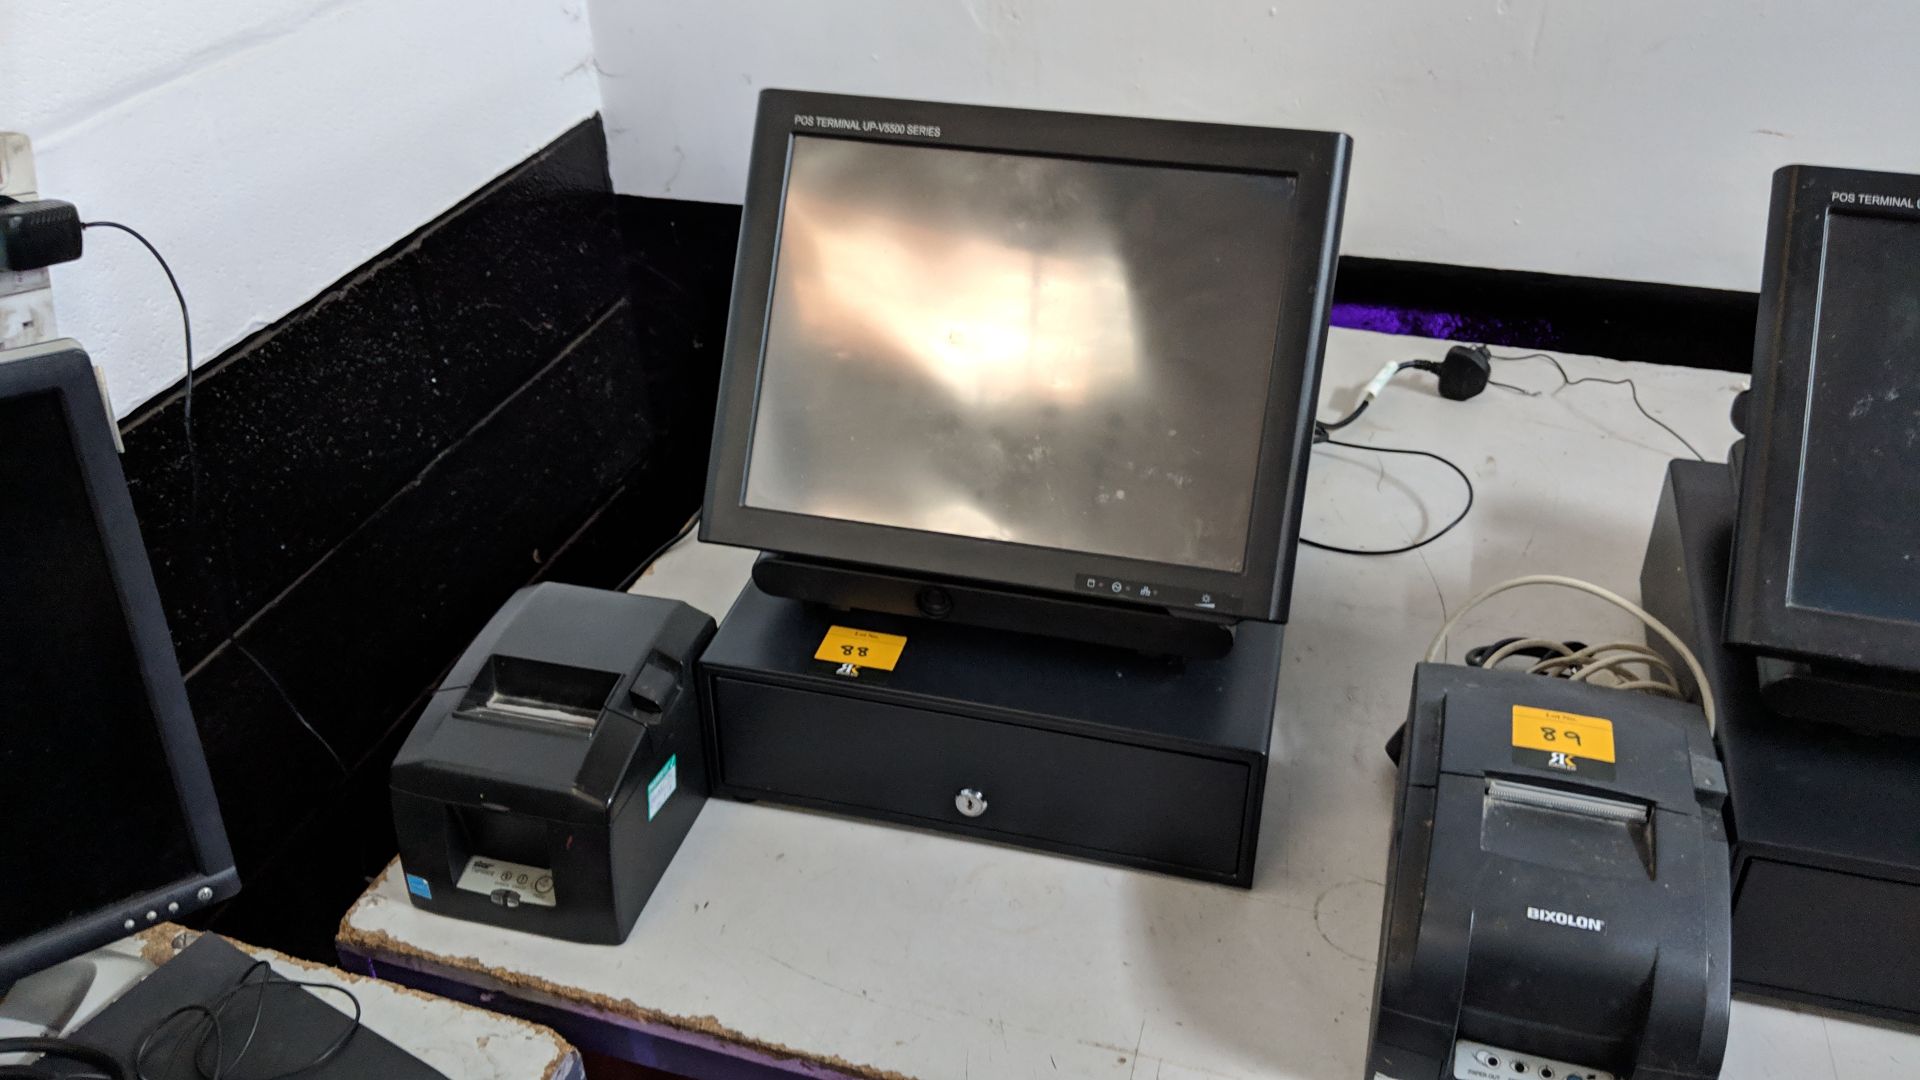 EPOS terminal UP-V5500 including cash drawer plus thermal receipt printer Lots 80 - 95 & 168 - 249 - Image 2 of 9